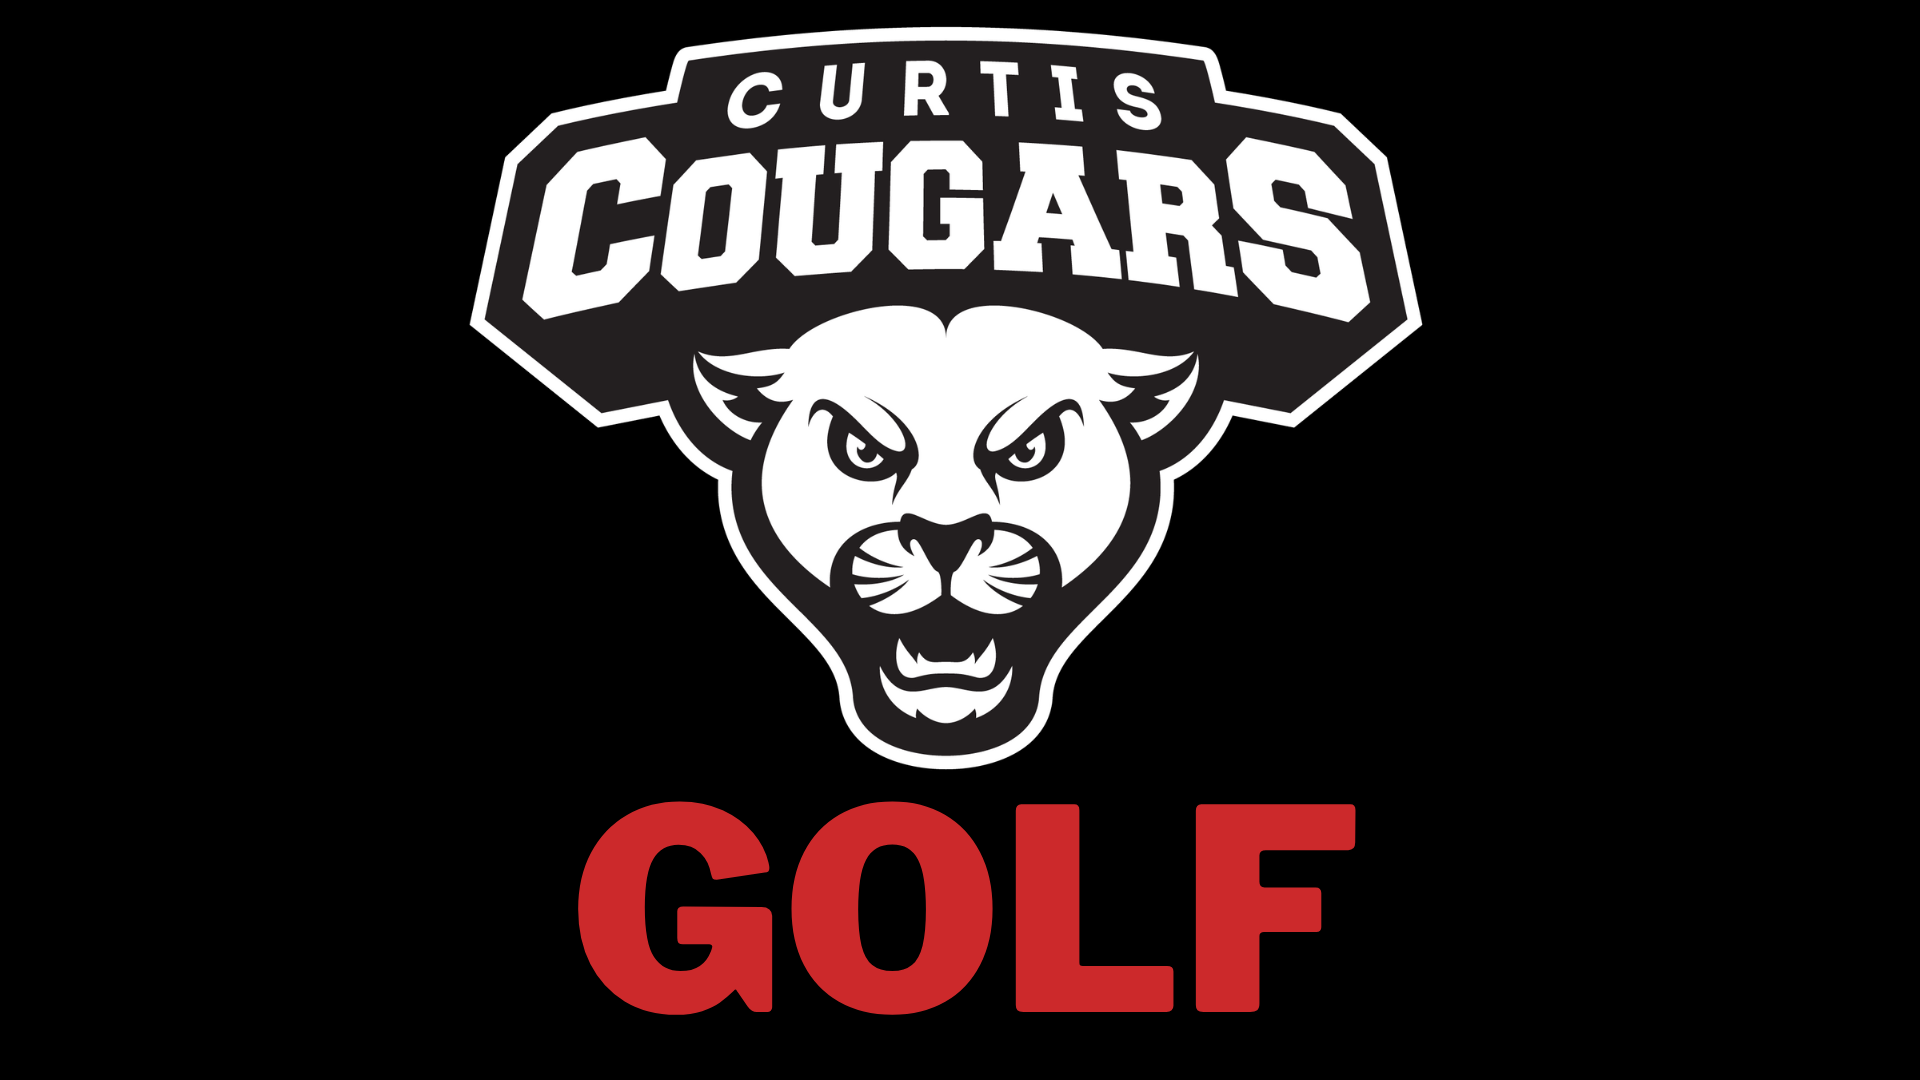 Curtis Cougars Golf